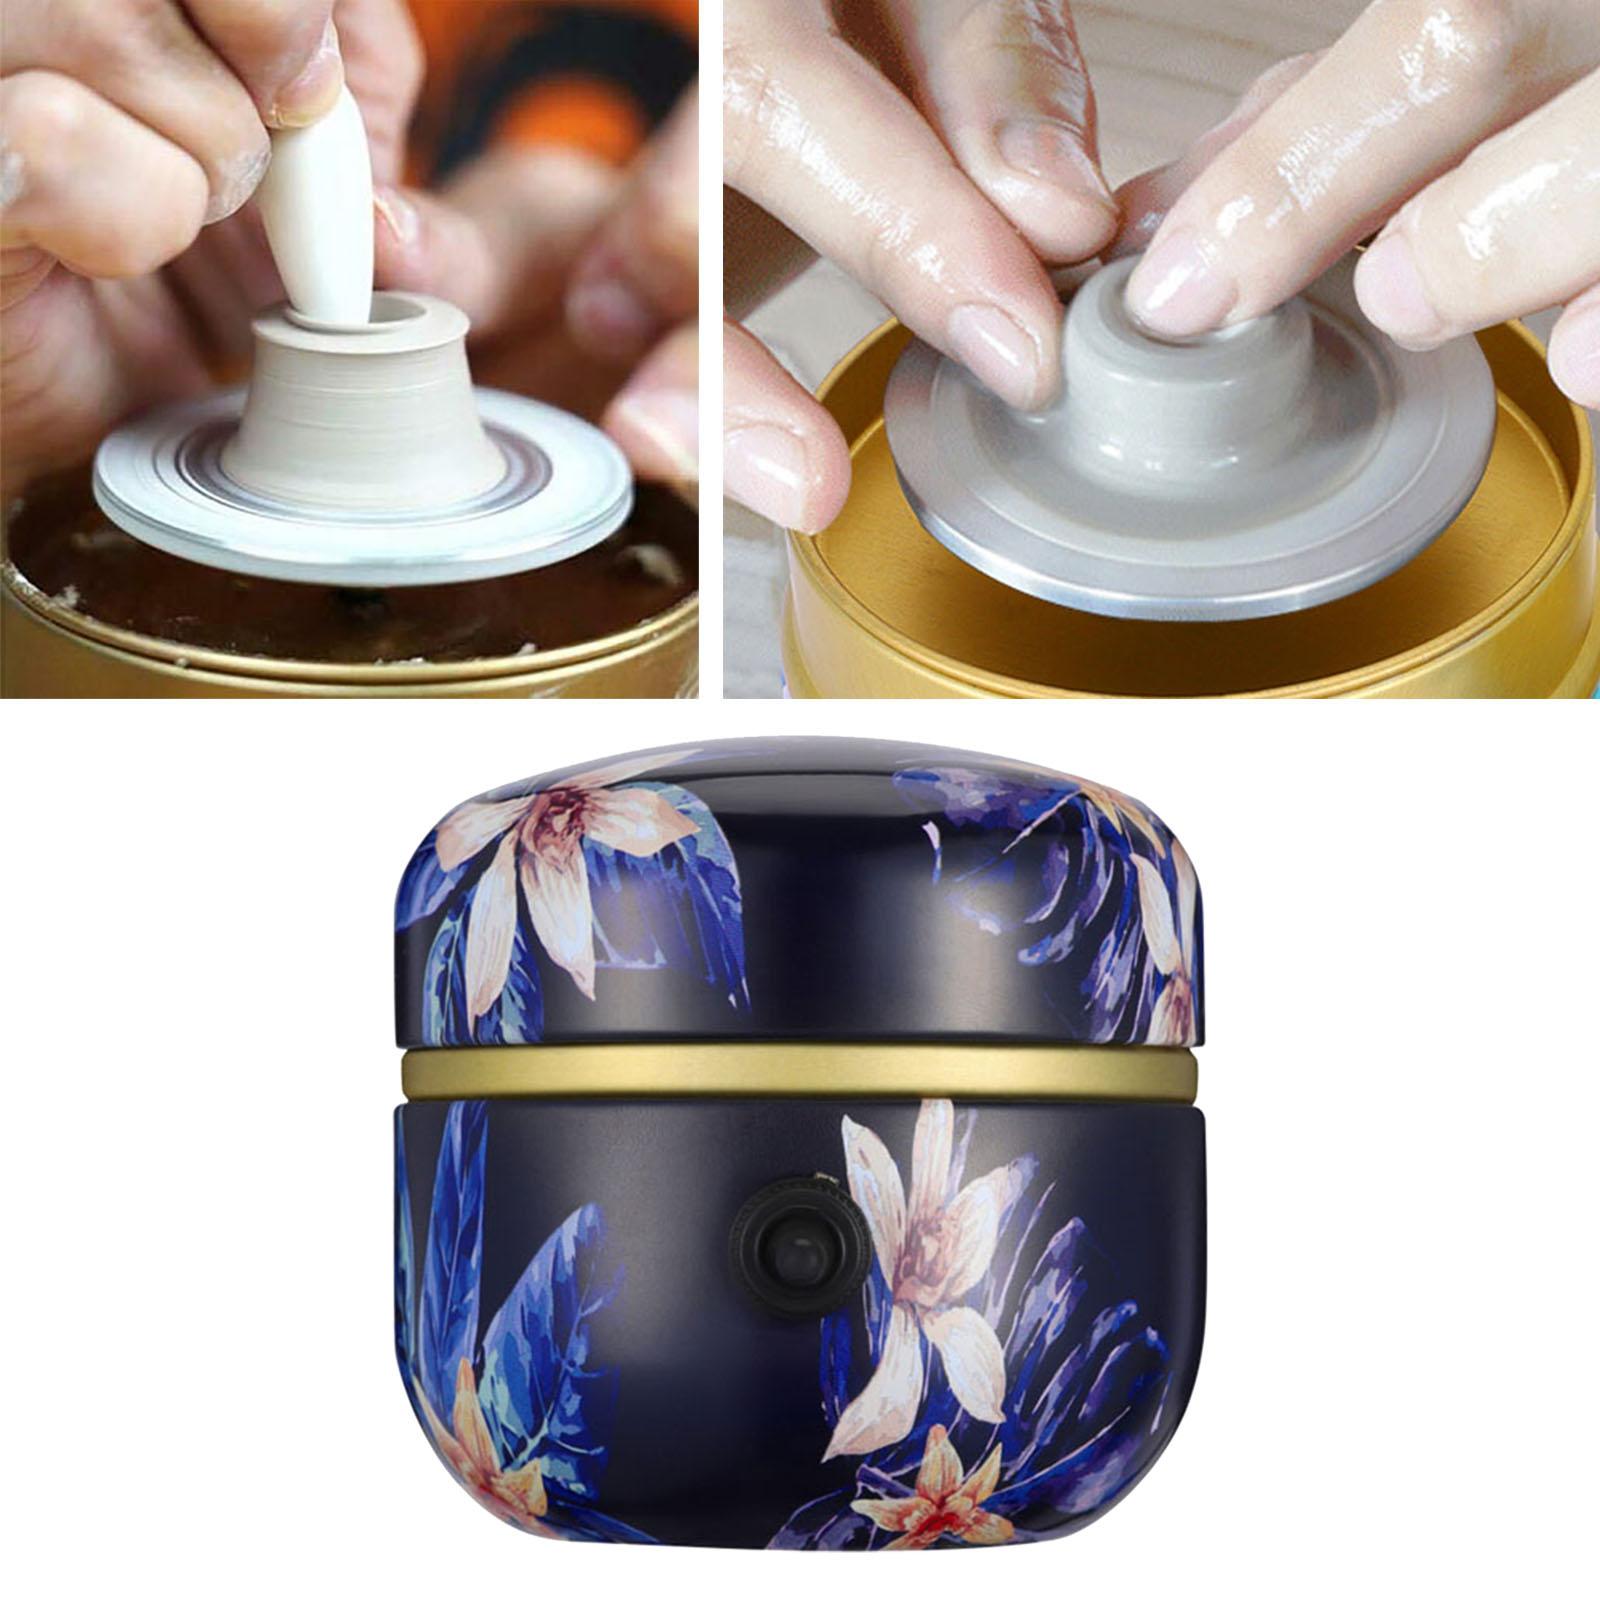 Mini Metal Electric Pottery Wheel Ceramic Rotating Turntable Forming  Machine Clay Making Adjustable Safety for Beginners Kids Dark Blue